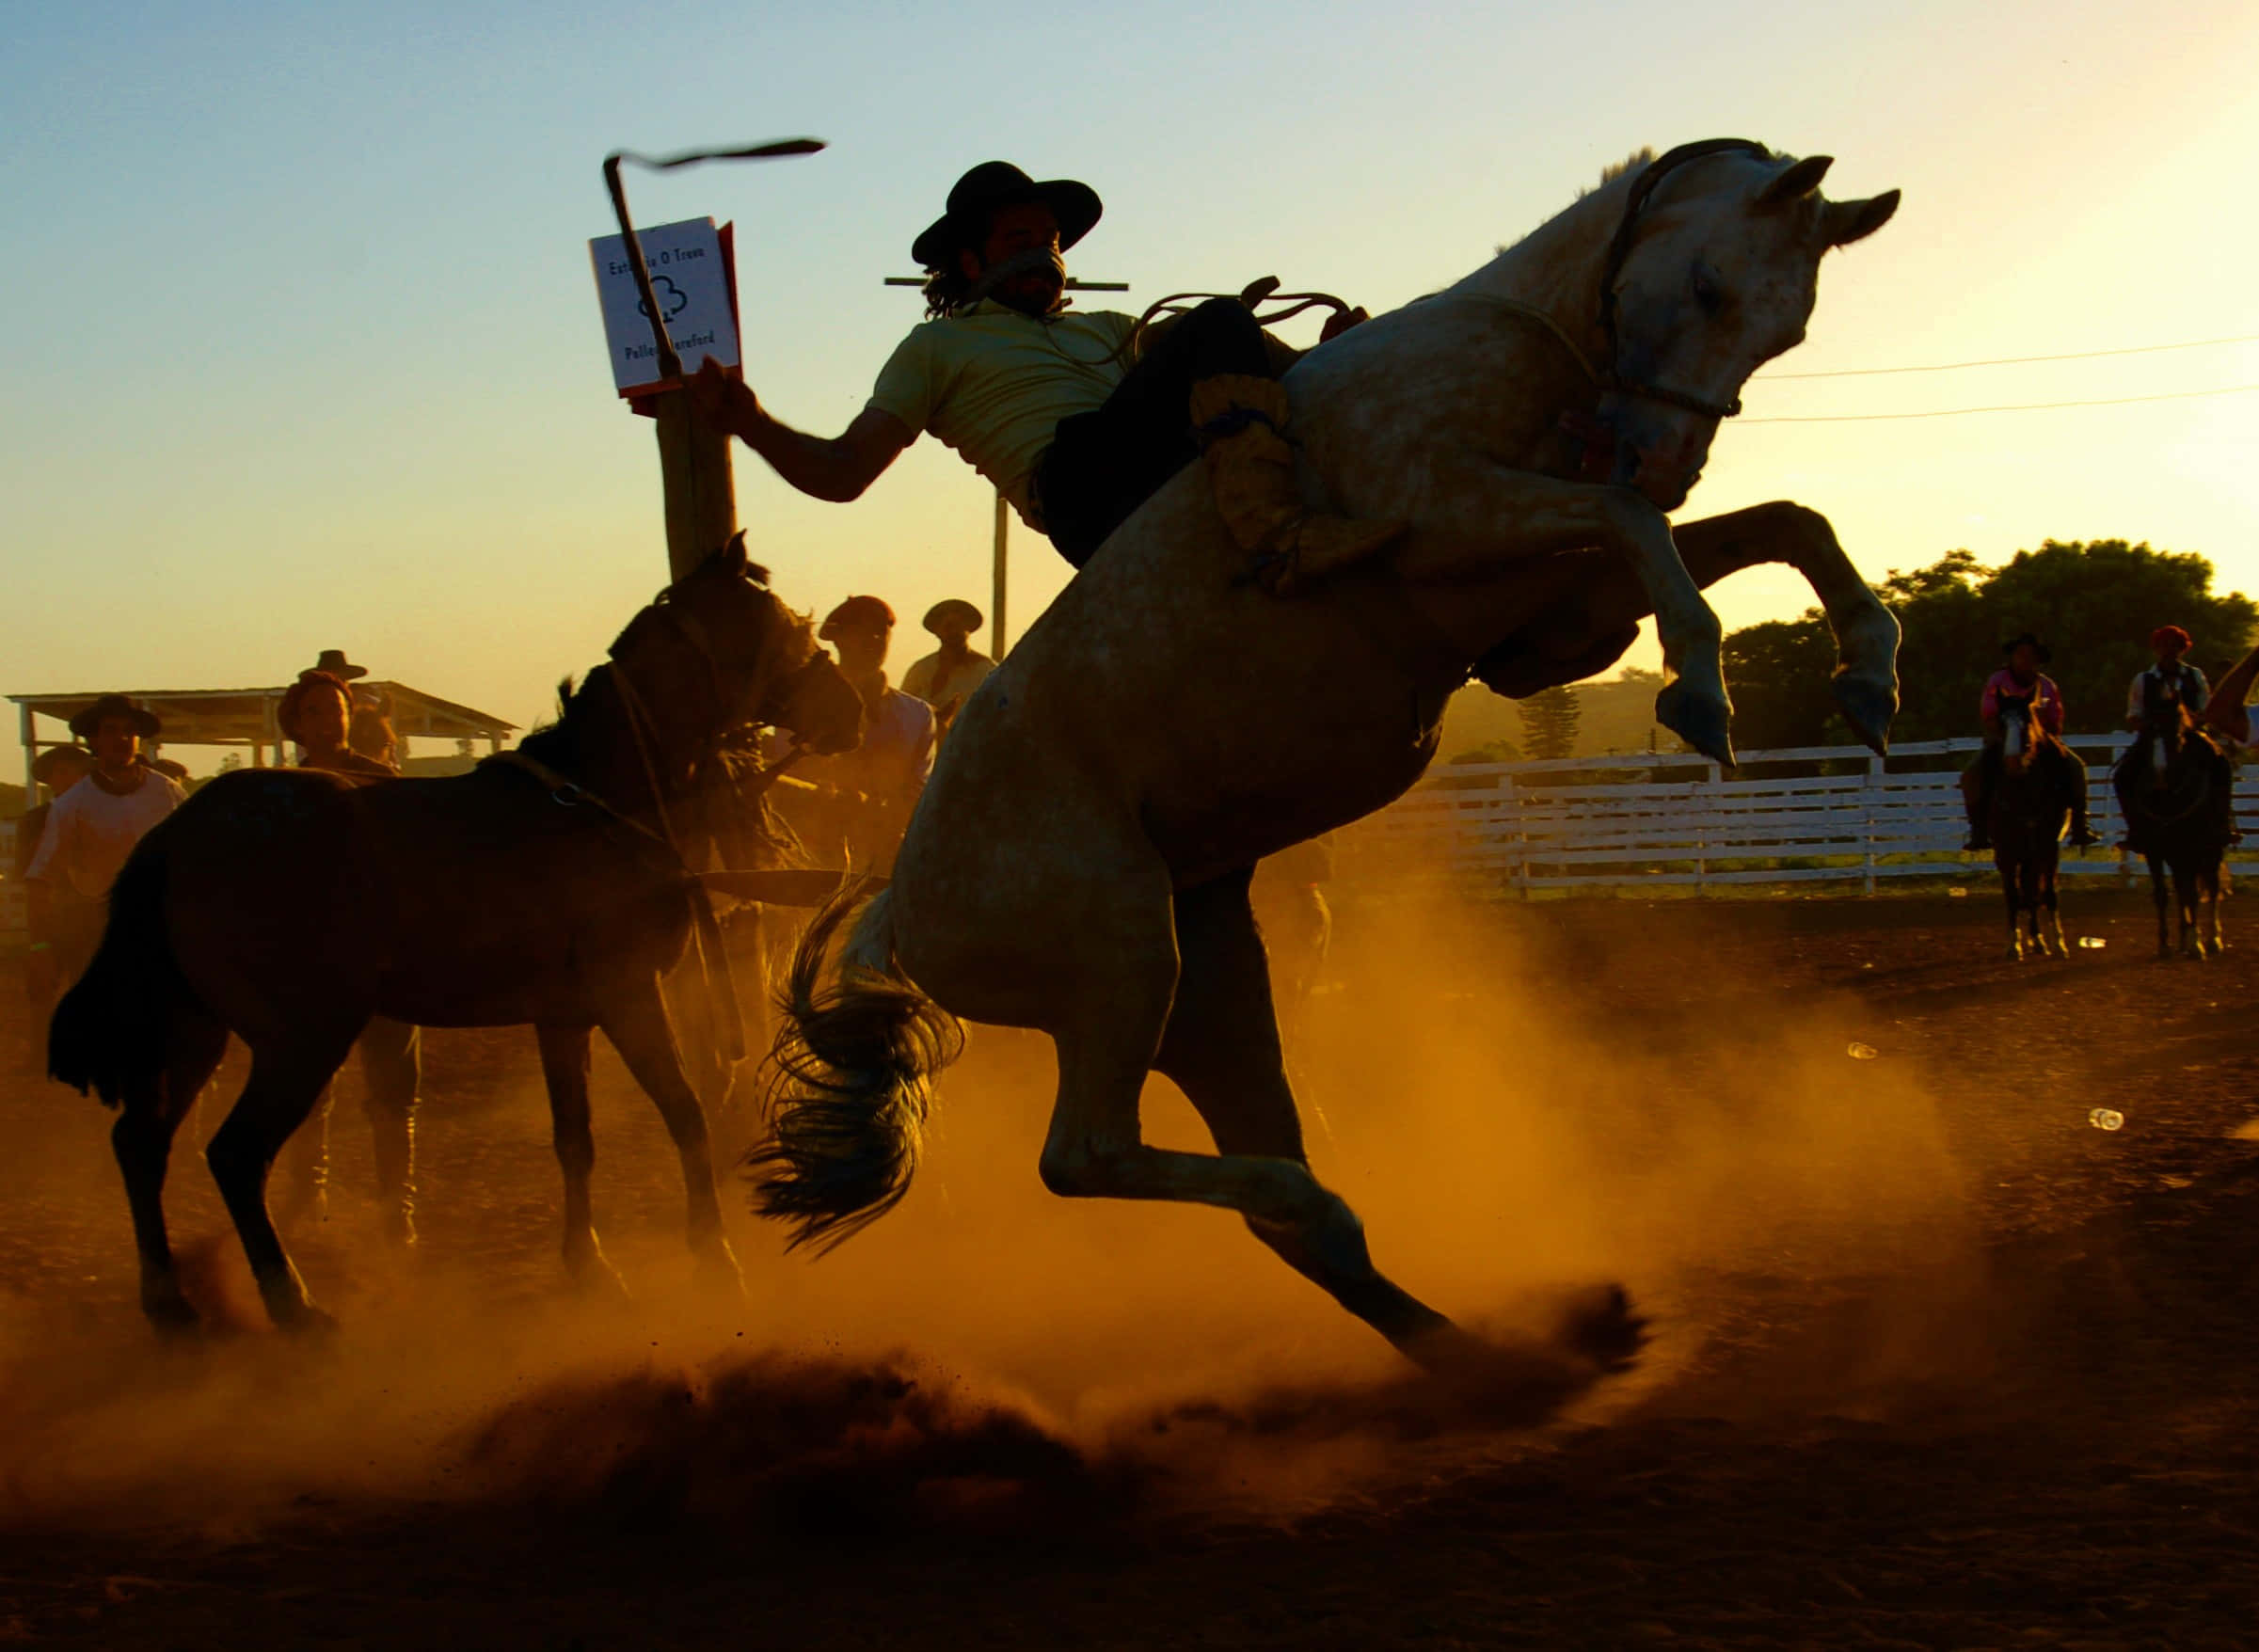 Cowboy skillfully riding a fierce horse in rodeo action